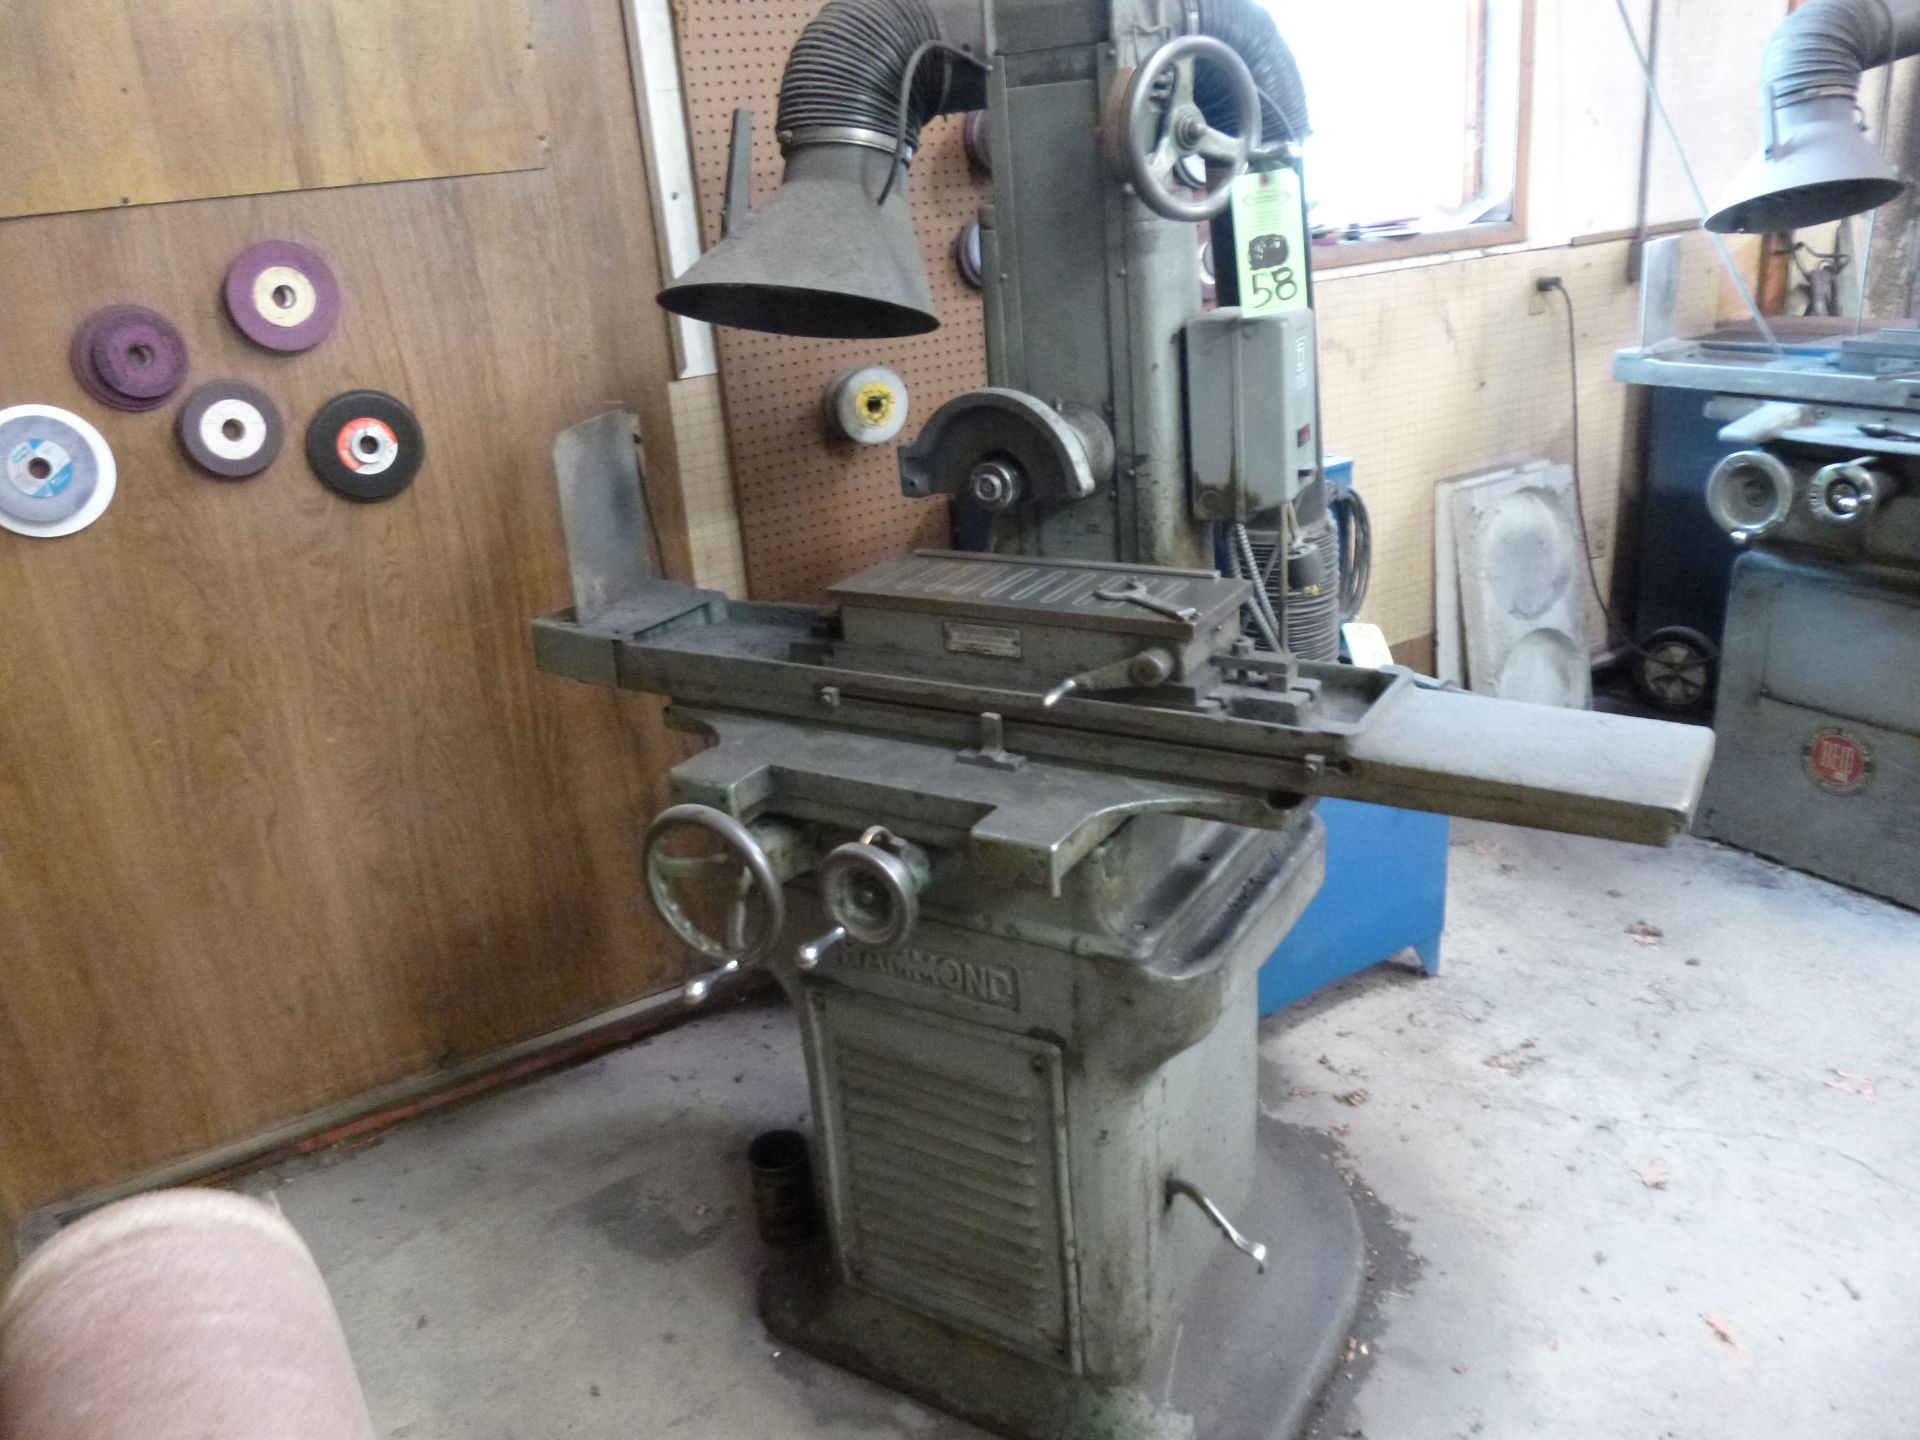 Hammond surface grinder, includes Brown and Sharpe Model 818, permanent magentic chuck (located at